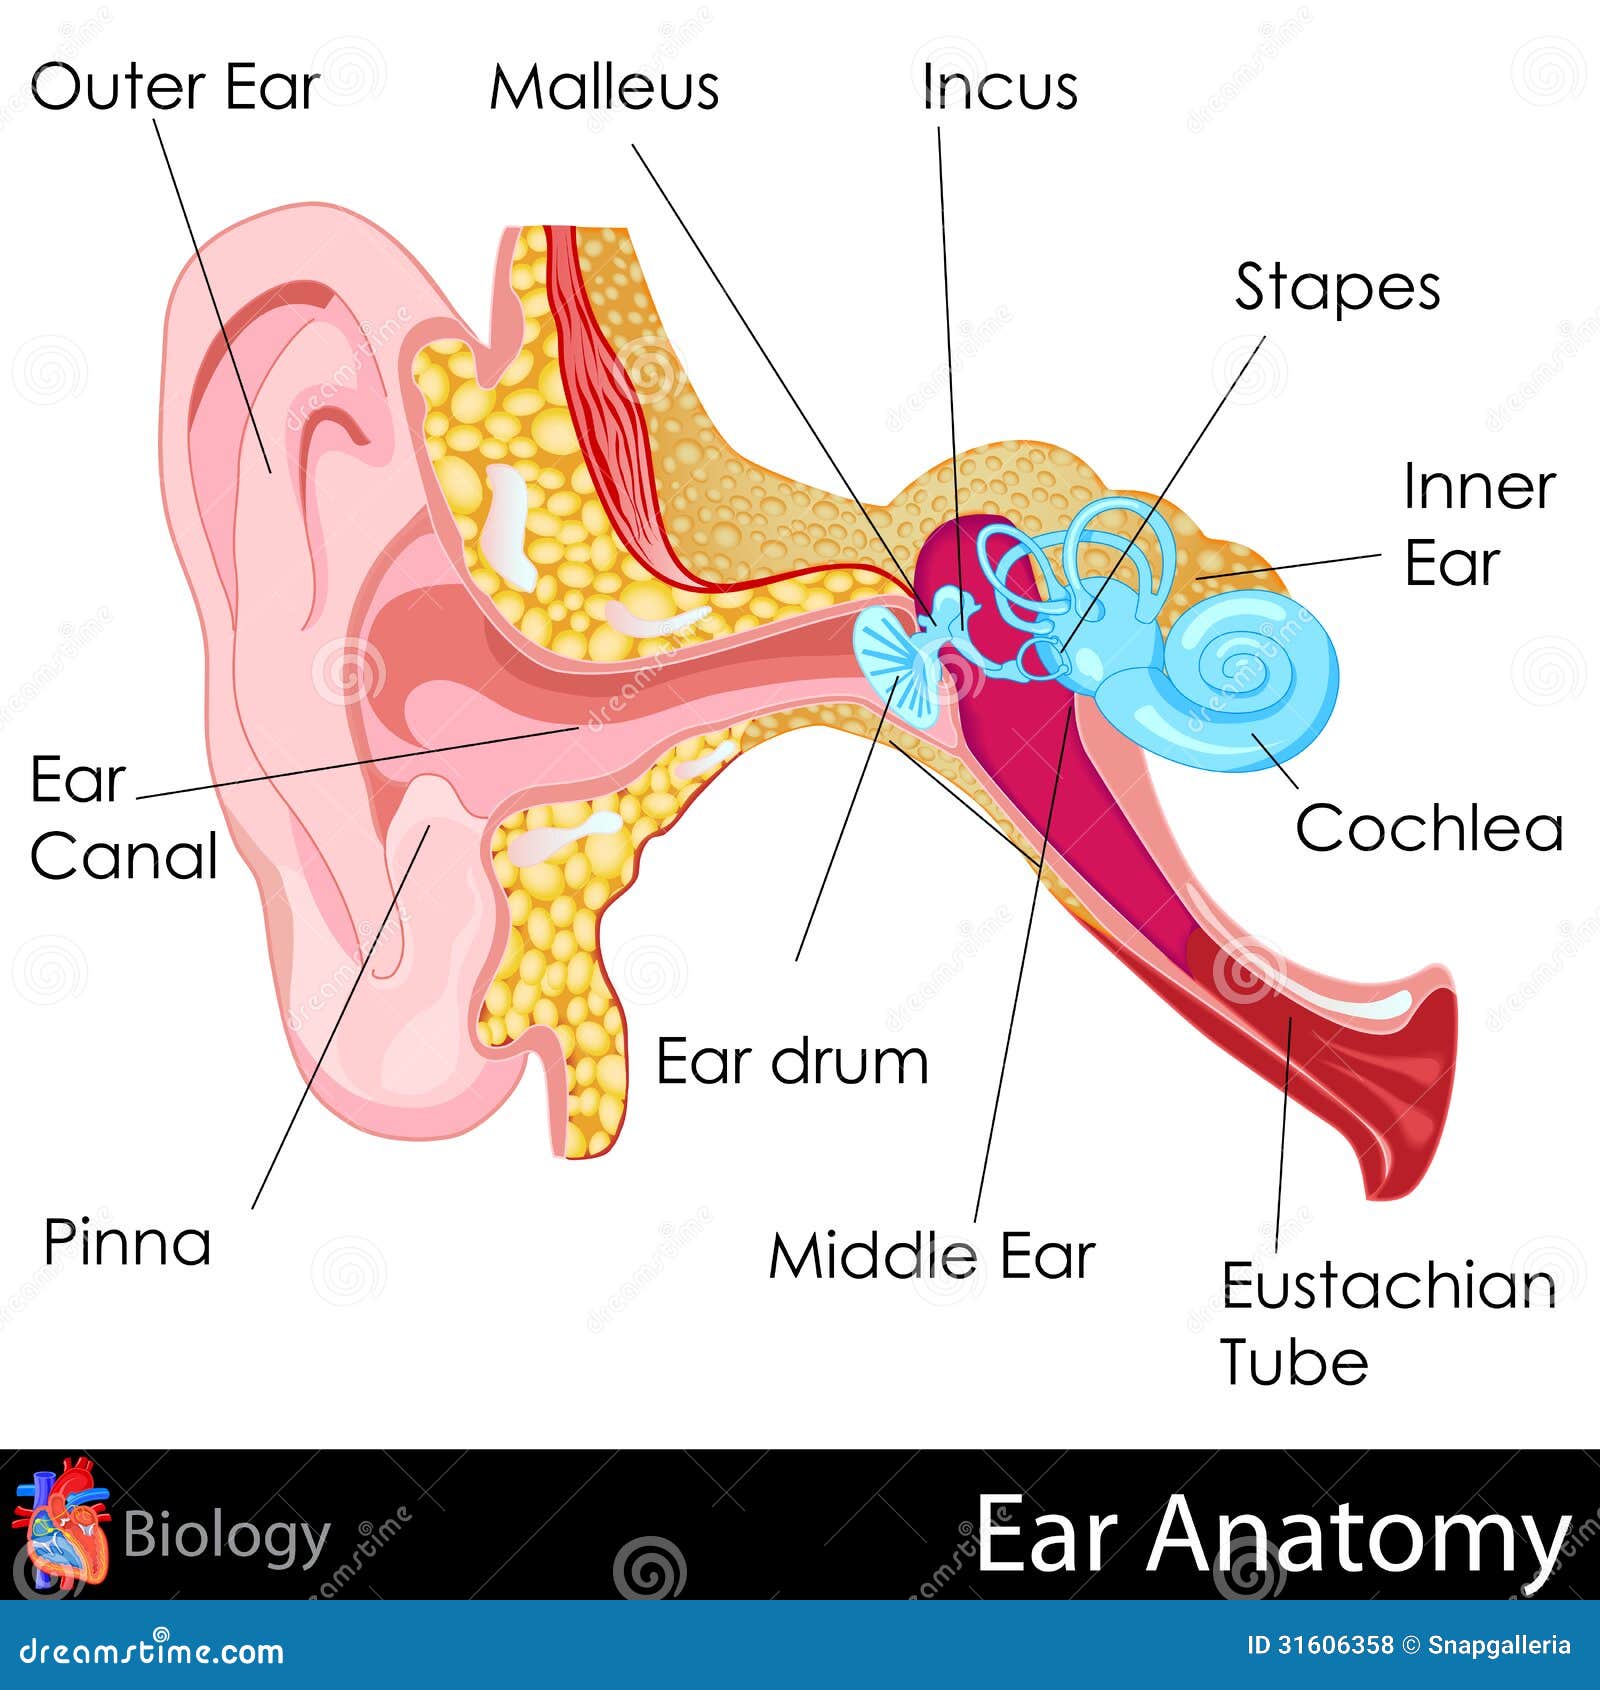 4,069 Ear Canal Images, Stock Photos & Vectors | Shutterstock